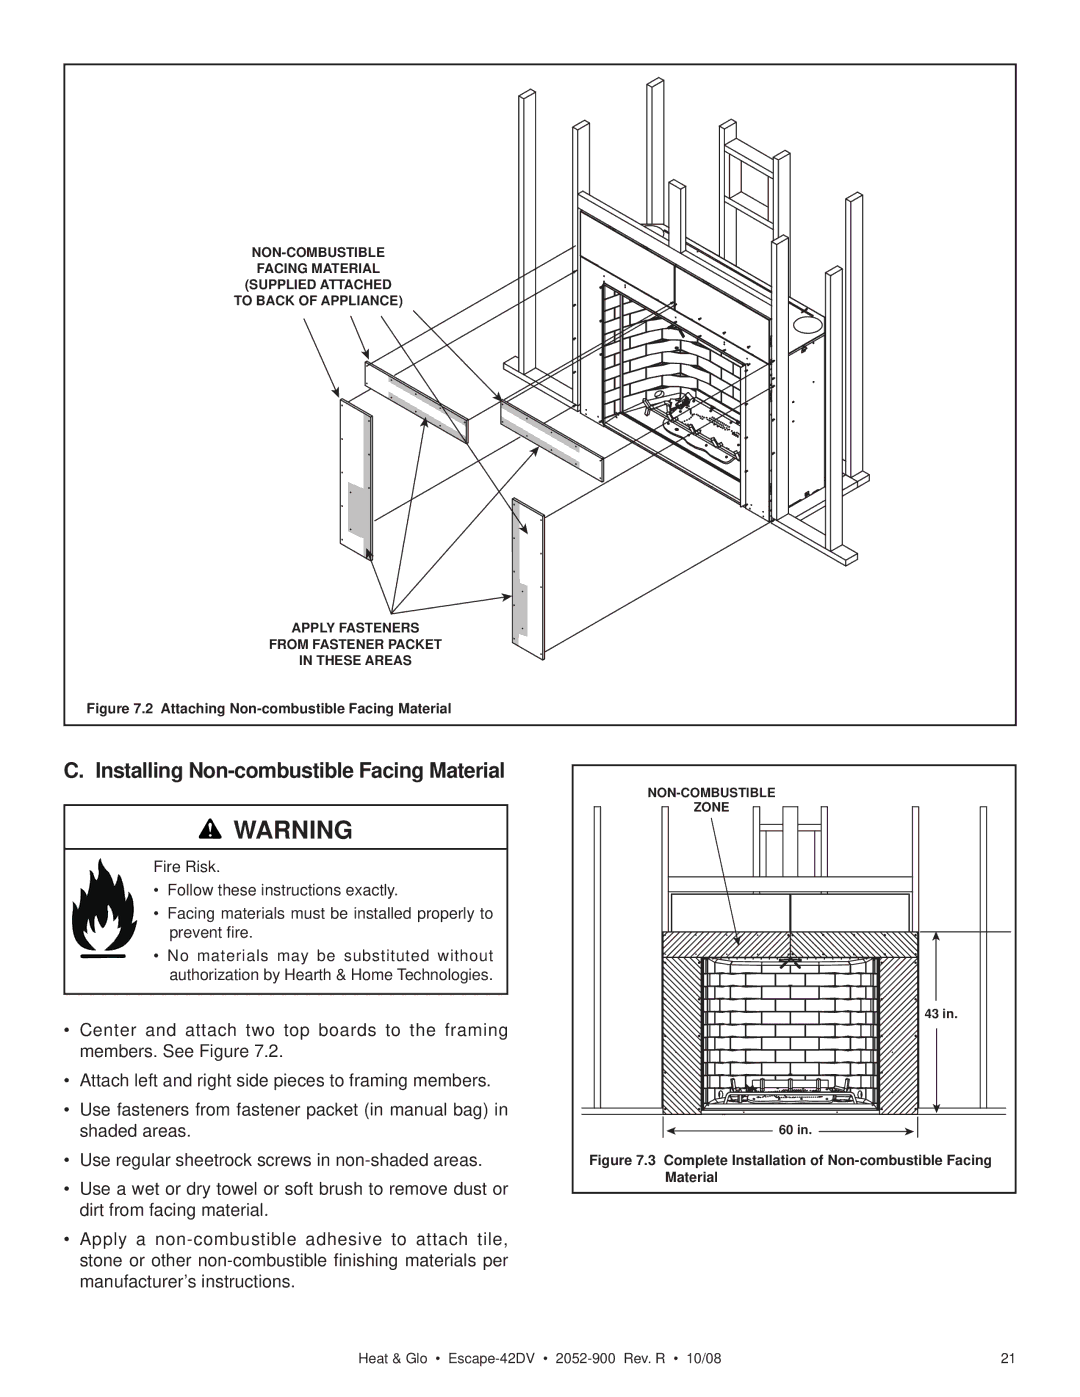 Hearth and Home Technologies ESCAPE-42DV owner manual Installing Non-combustible Facing Material 